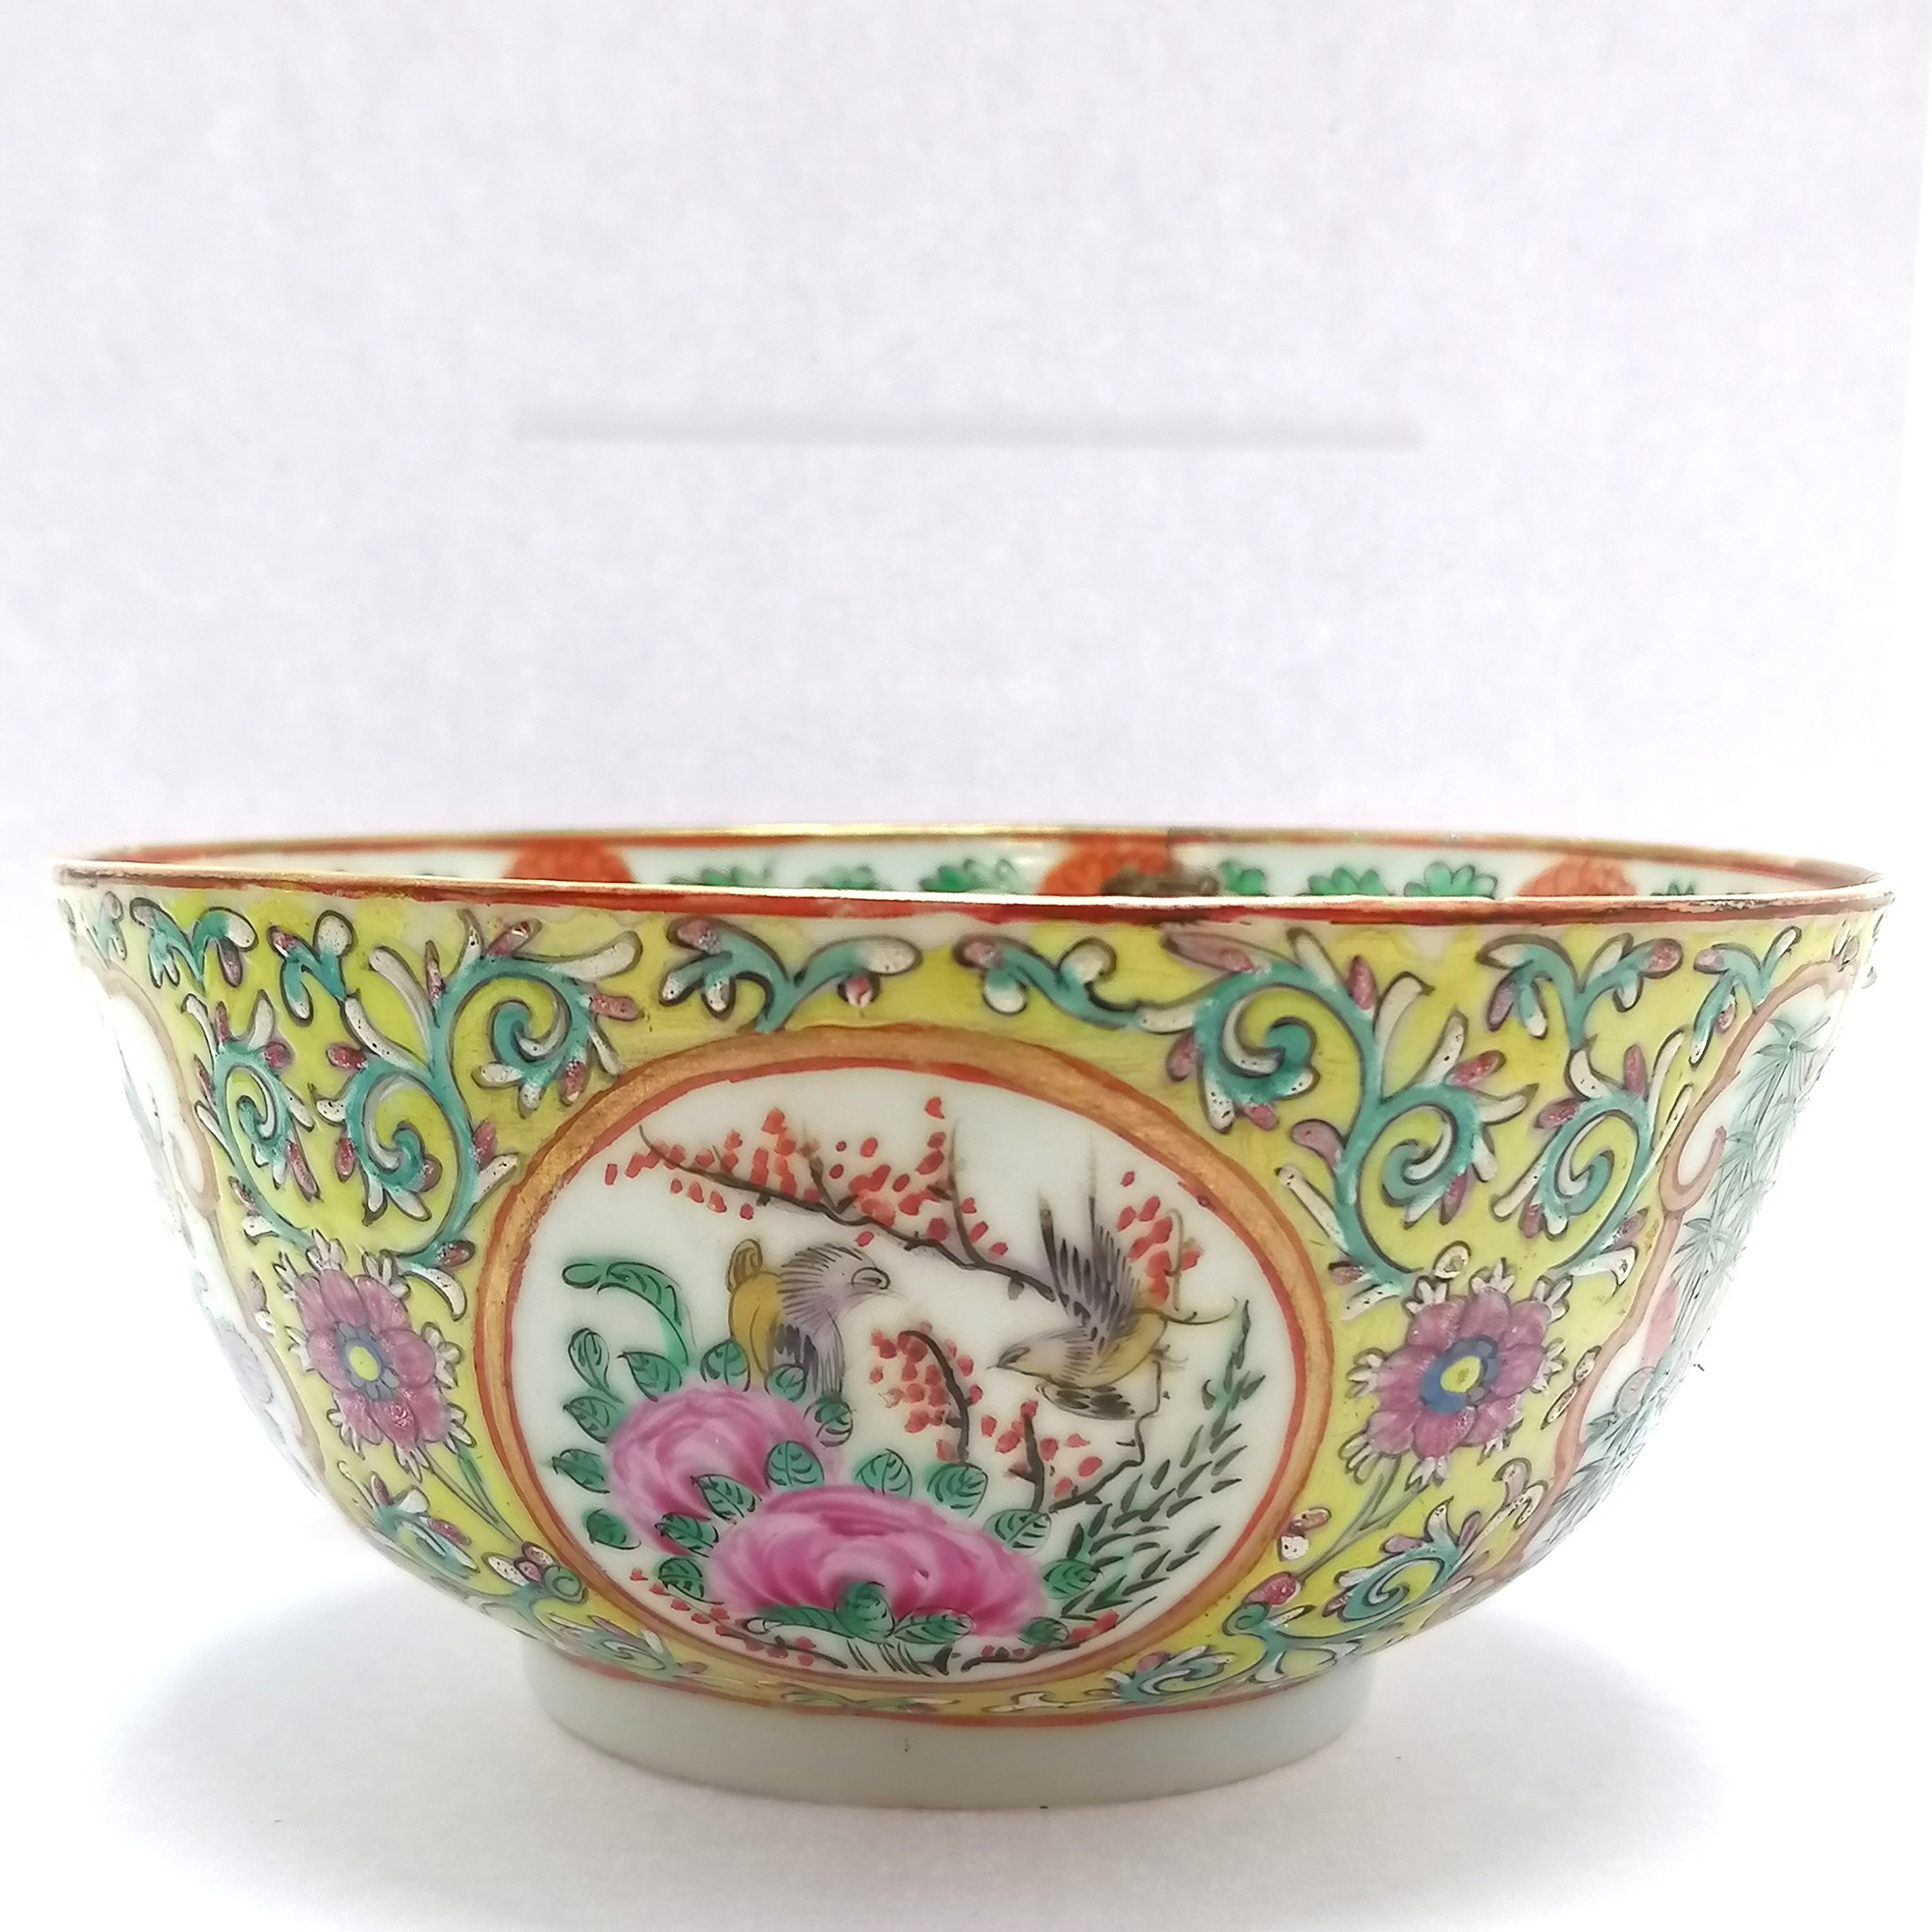 Antique Chinese famille rose bowl - yellow grounded with profuse floral & butterfly & bird (inc